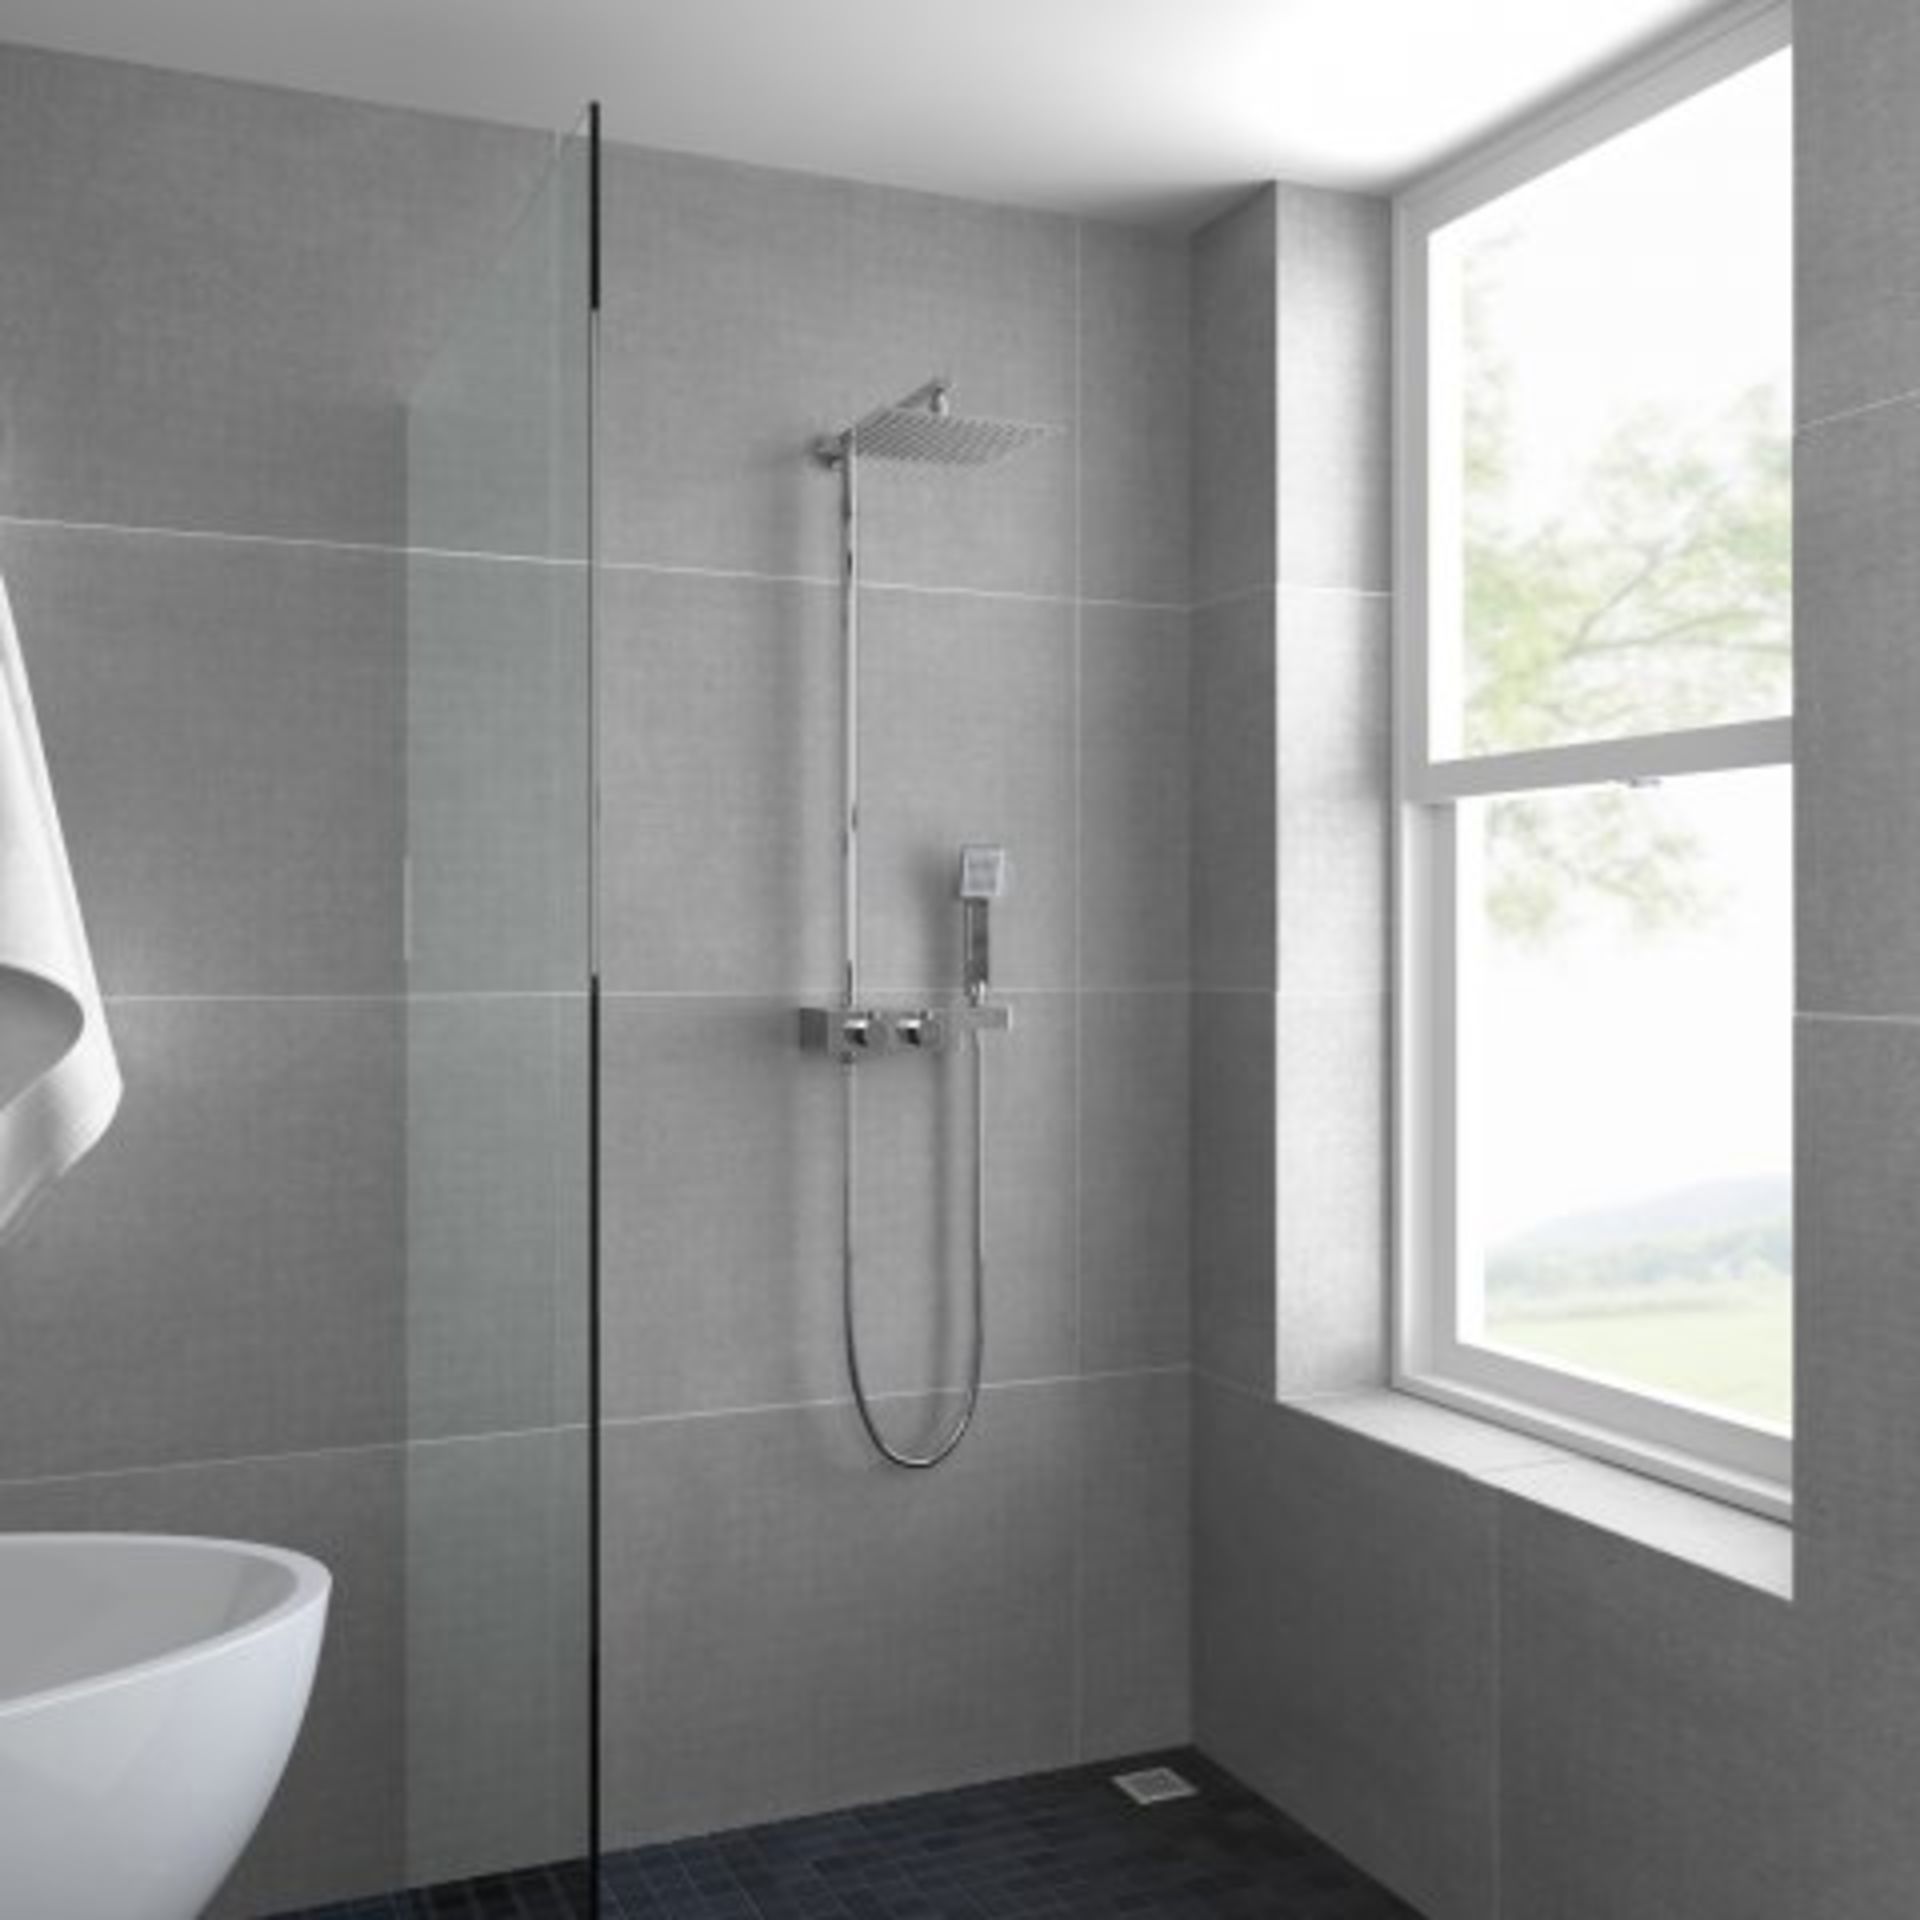 (K160) 250mm Large Square Head Thermostatic Exposed Shower Kit, Handheld & Storage Shelf. RRP £349. - Image 3 of 5